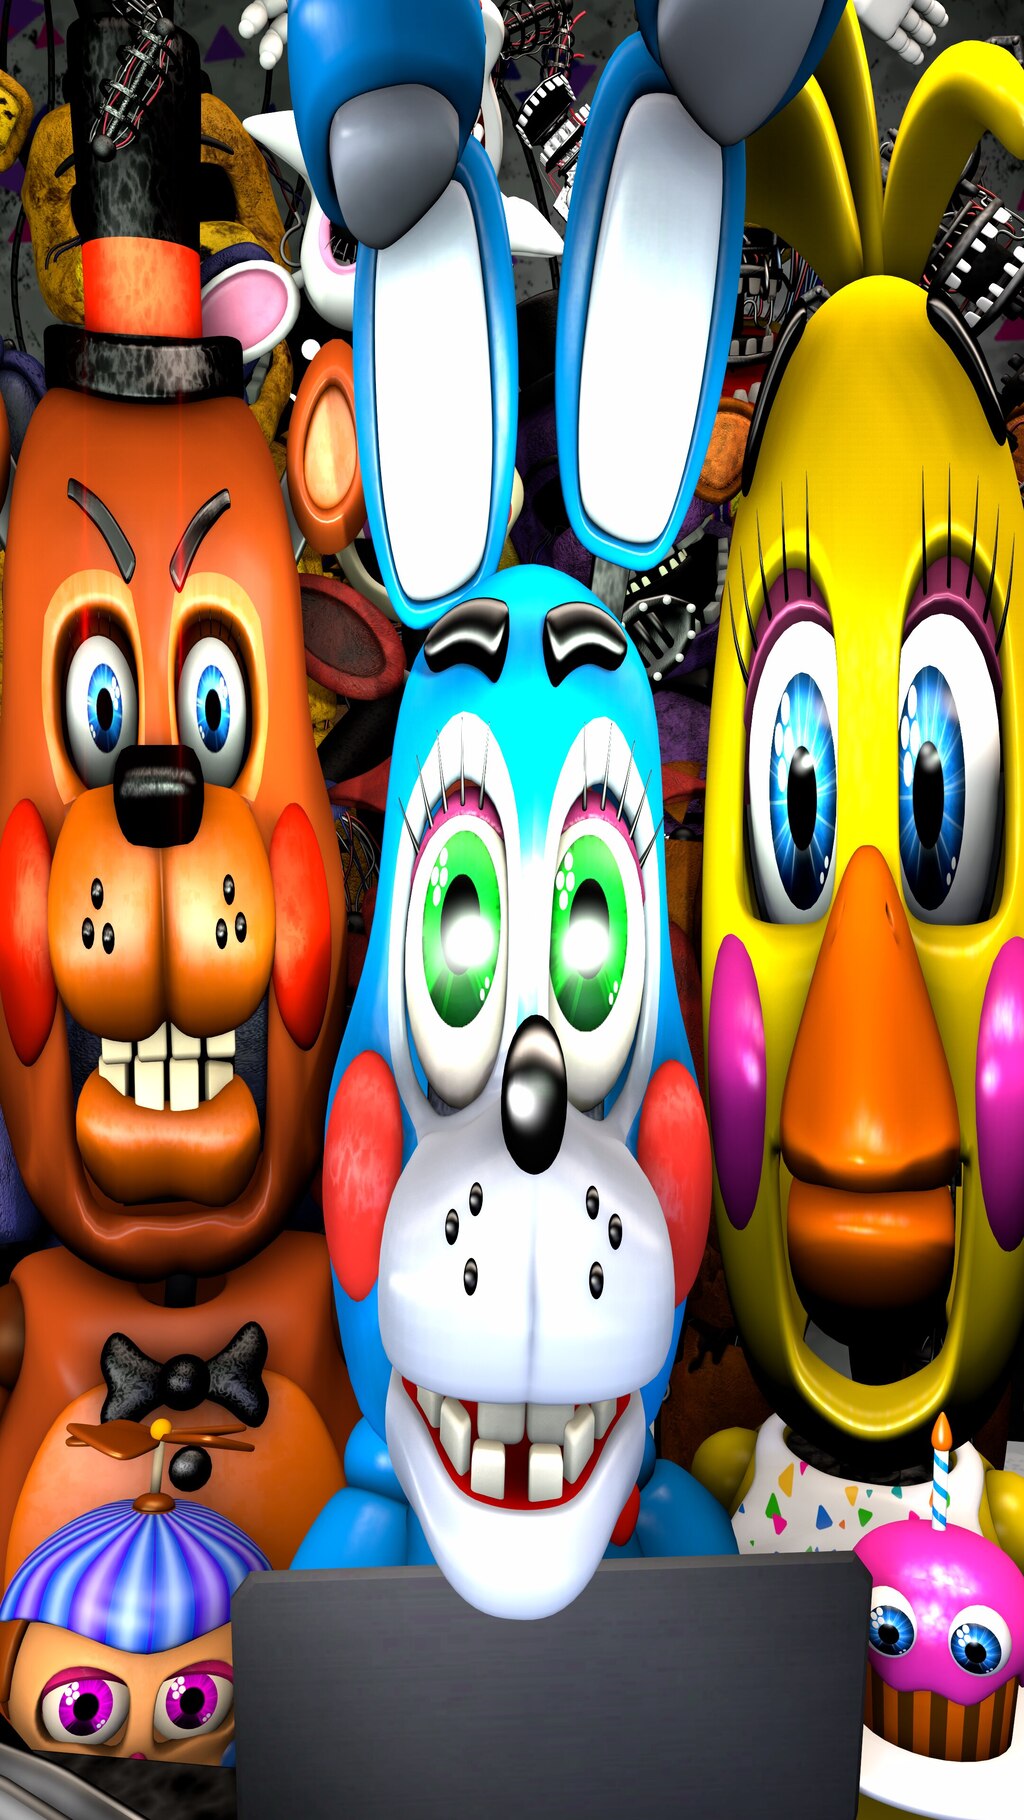 Steam Community :: Five Nights at Freddy's: Security Breach, five